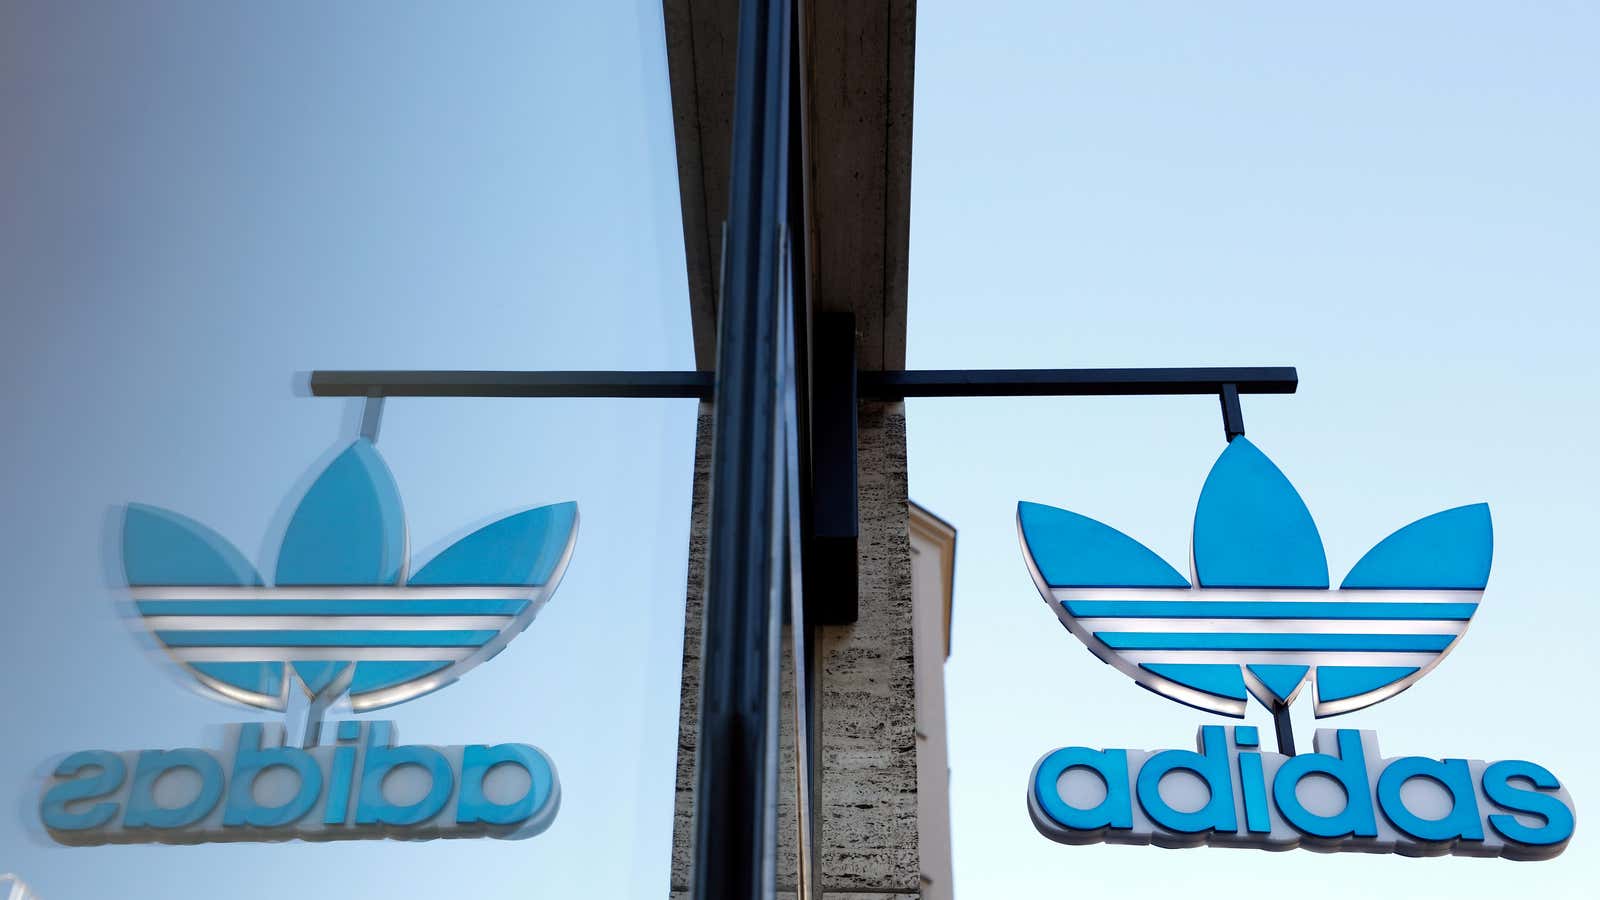 Adidas is investing more than €1 billion in a digital transformation.